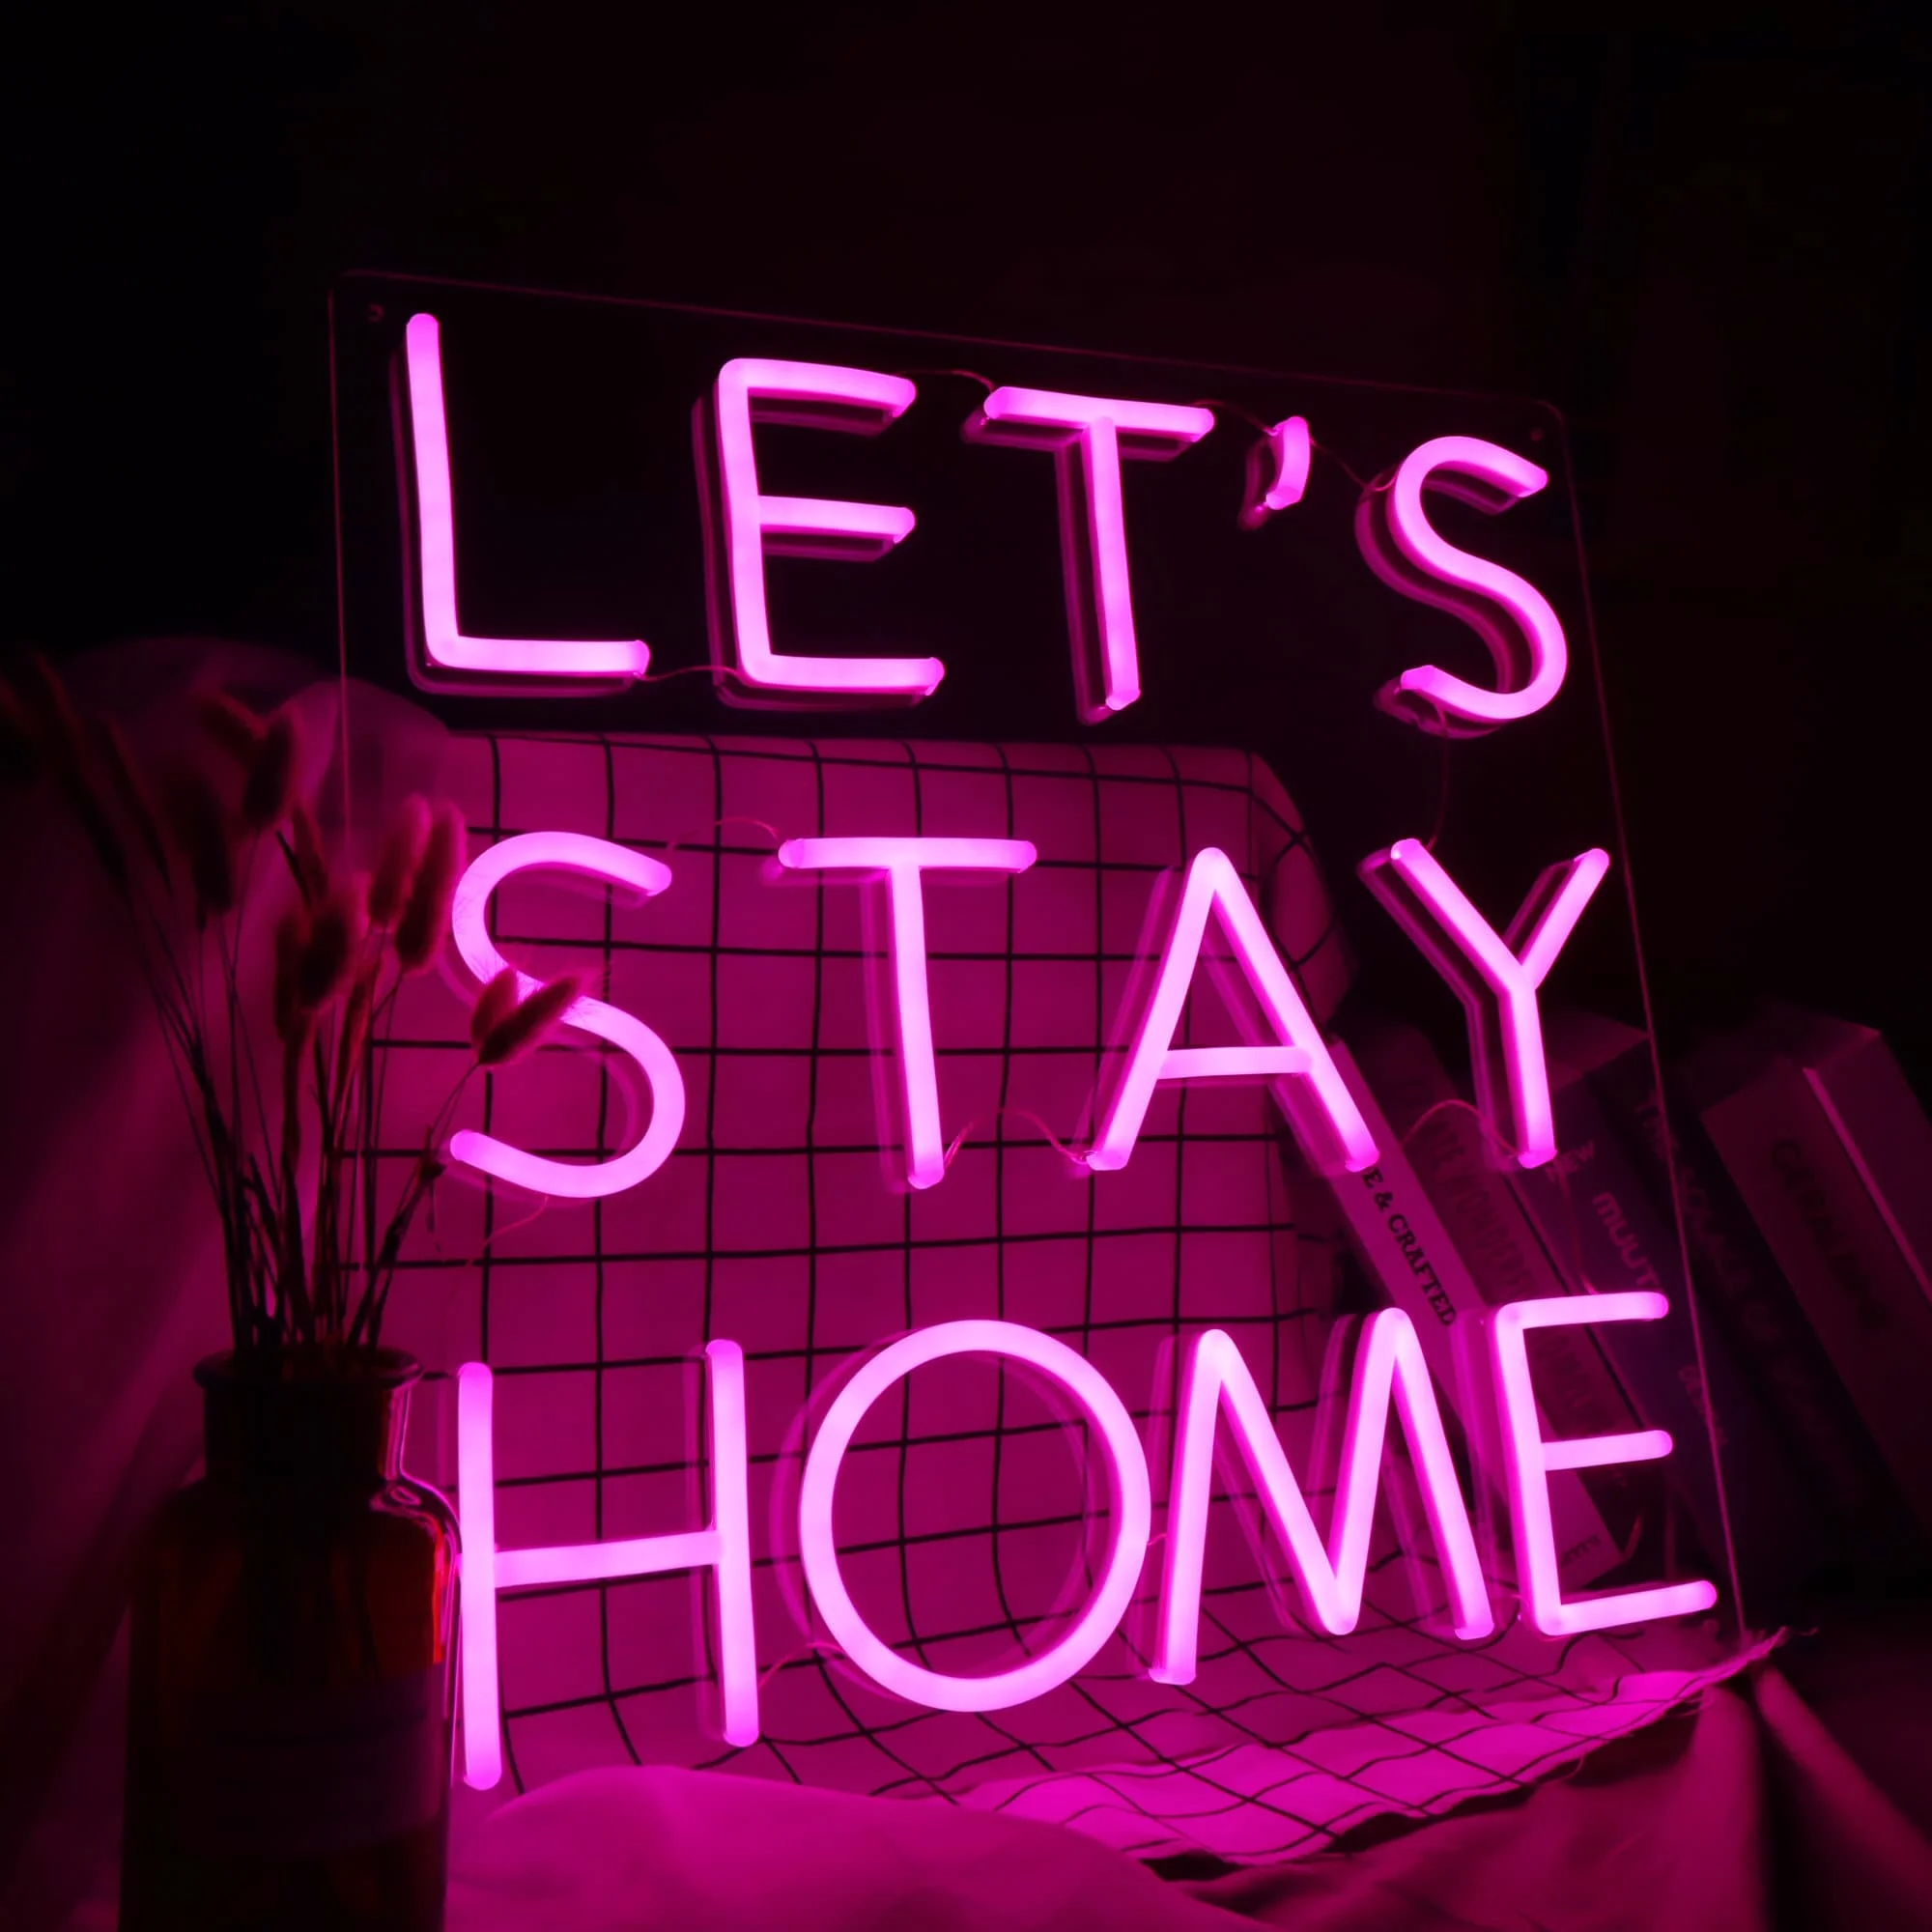 

Lets Stay Home Custom Neon Sign Decorative Lamps Living BedRoom Decoration Wall Light For Children Room Neon Decor